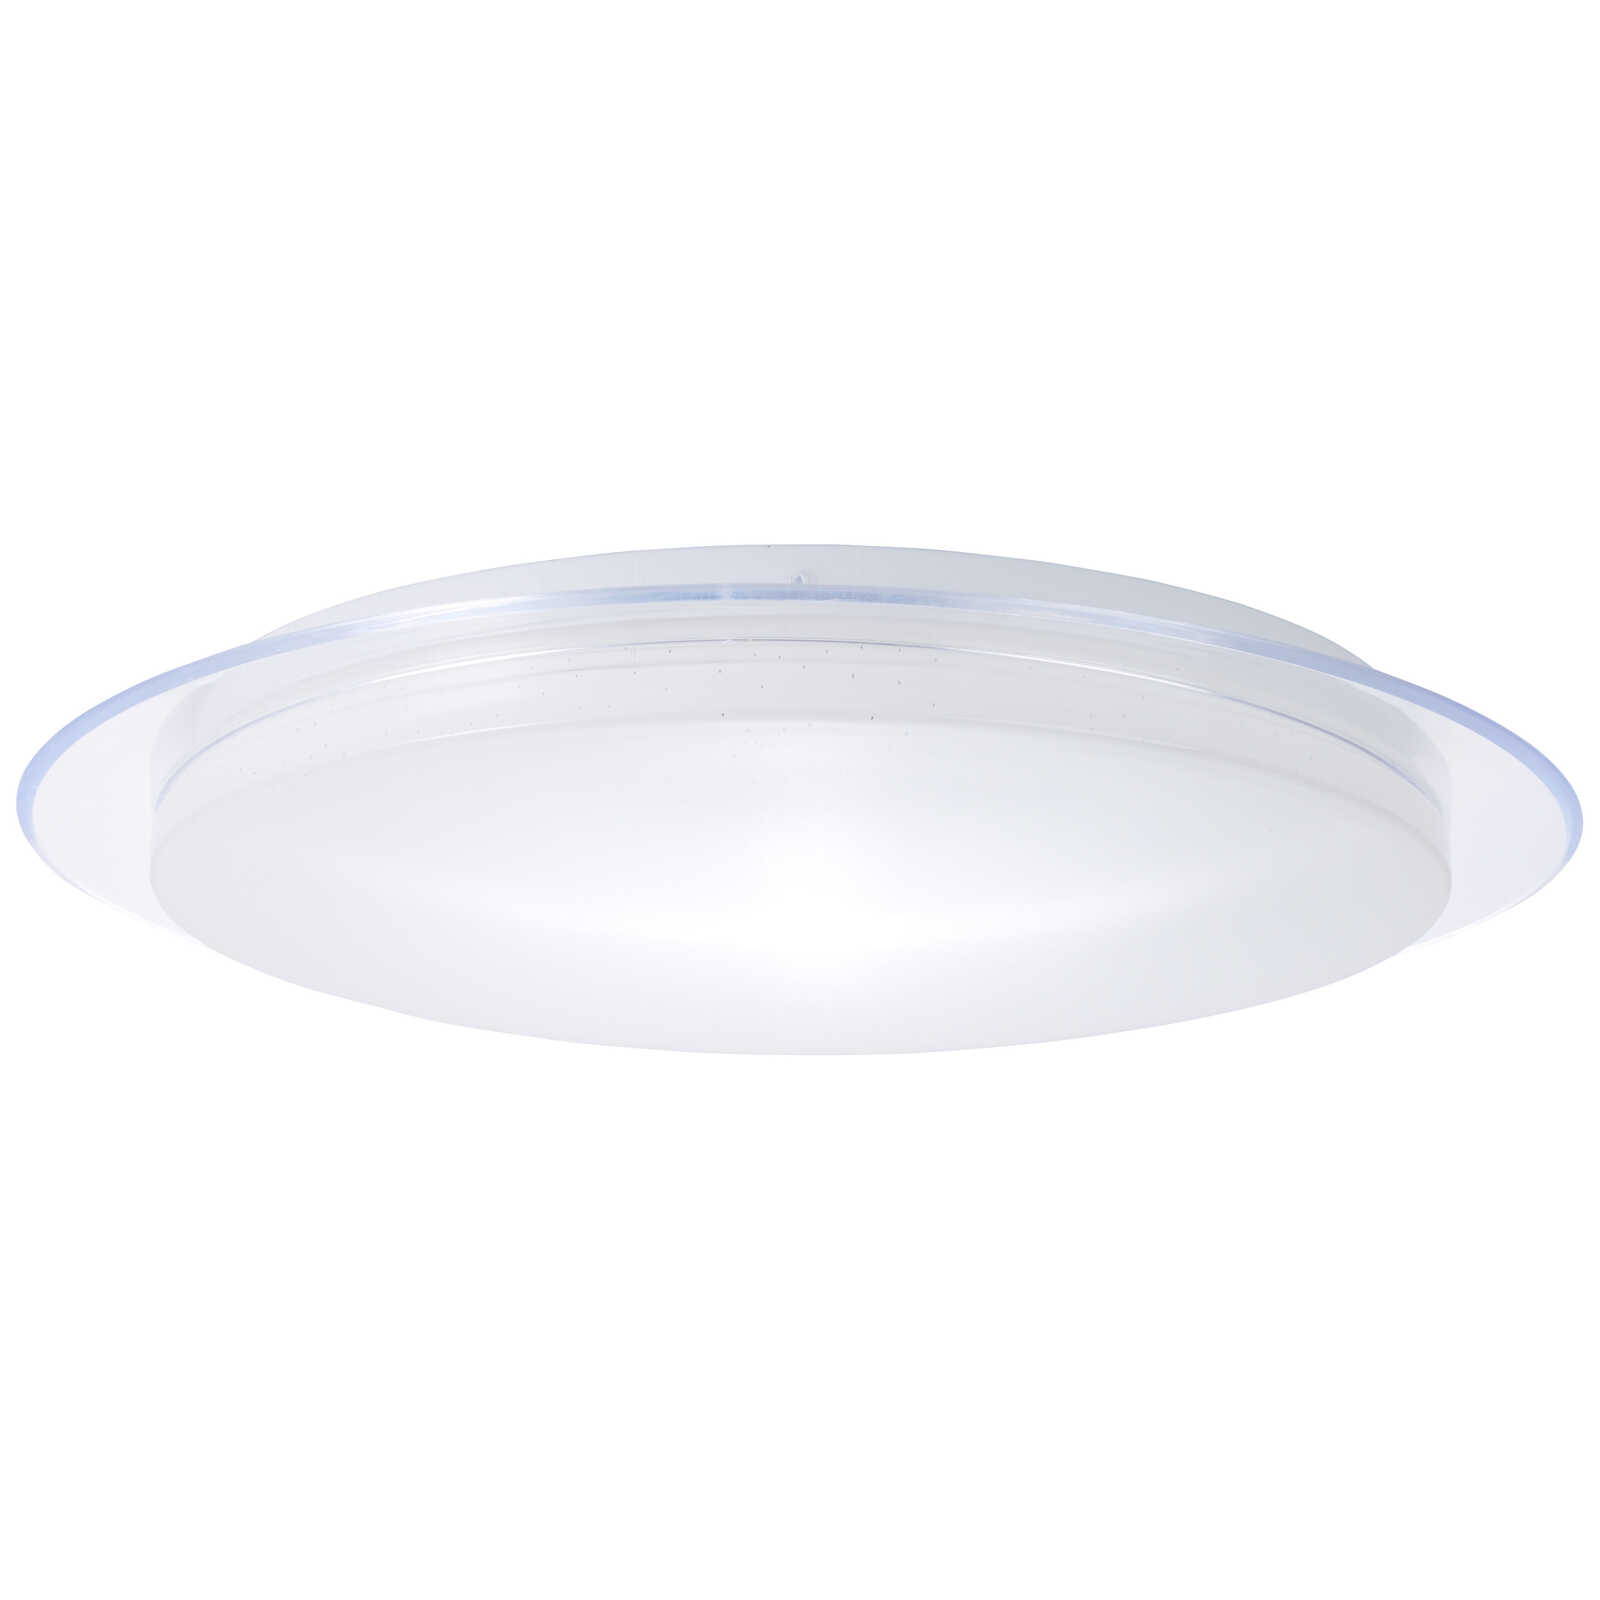             Plastic wall and ceiling light - Theo 2 - White
        